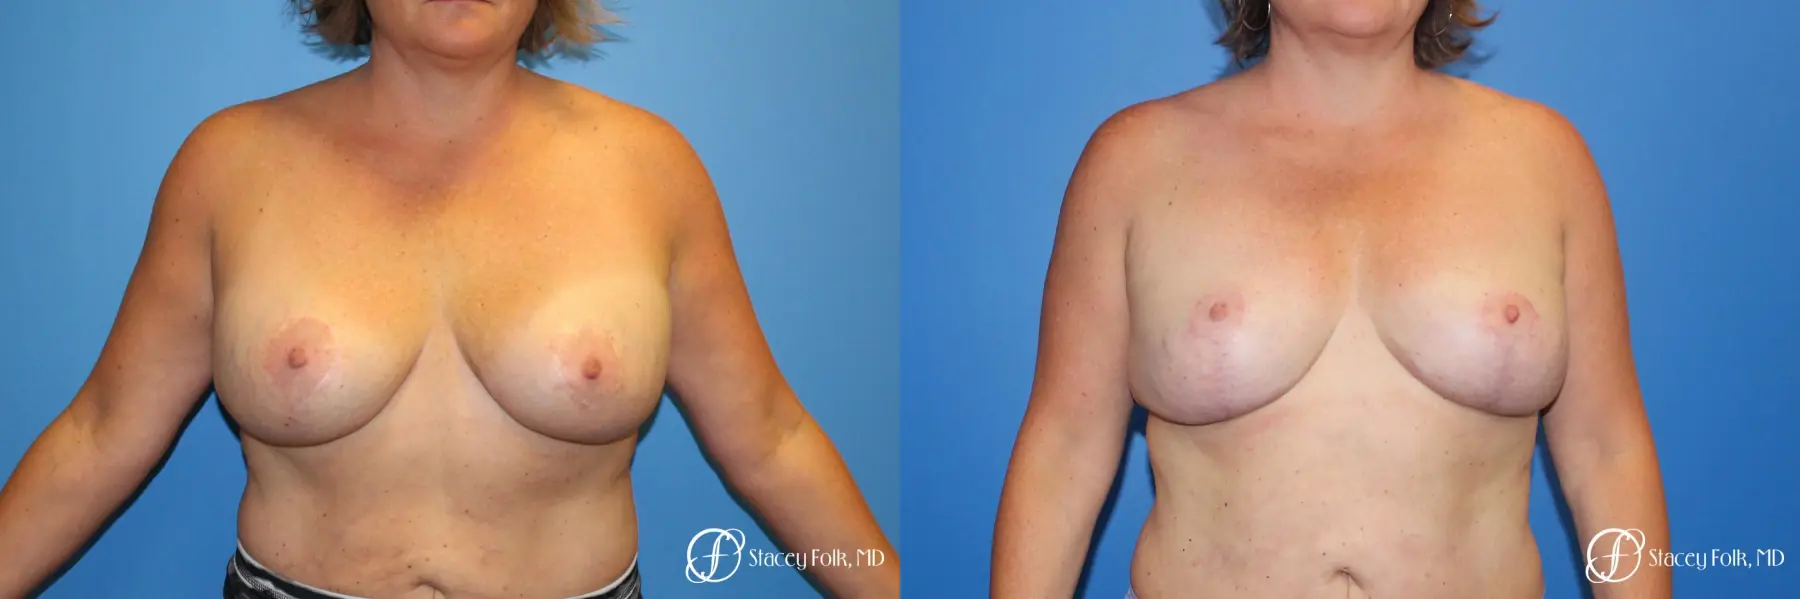 Breast Revision - Removal of Implant, Fat Transfer, Breast Lift (Mastopexy) - Before and After